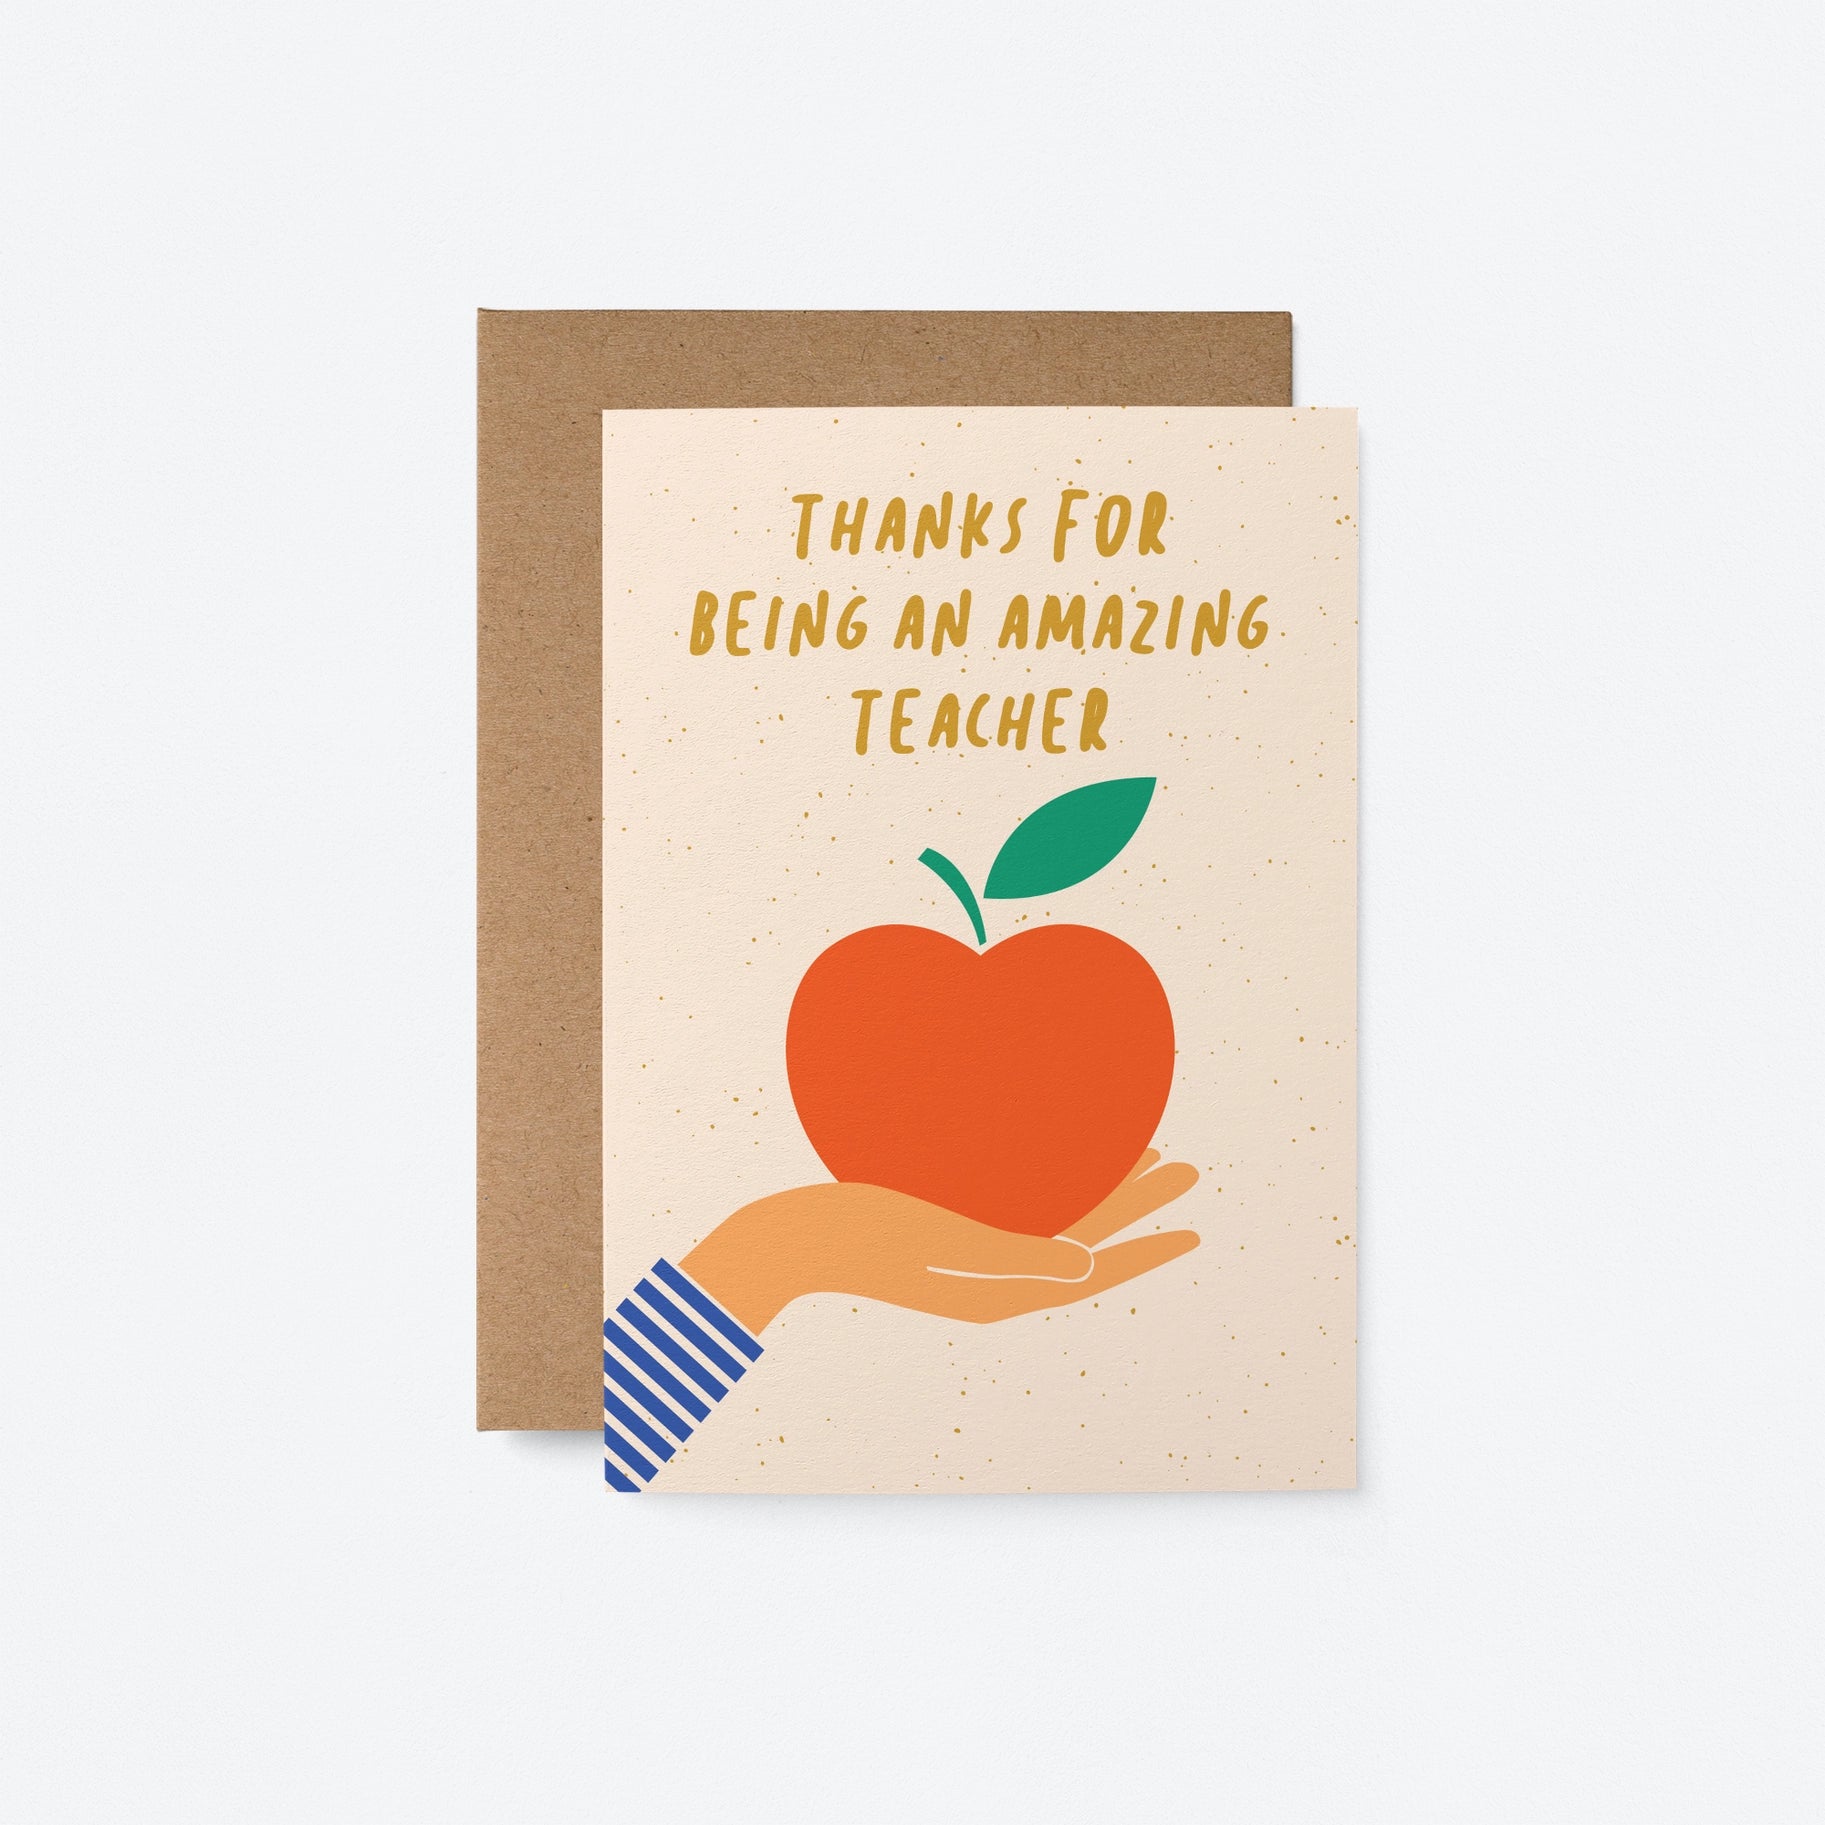 Thanks for being an amazing teacher greeting card